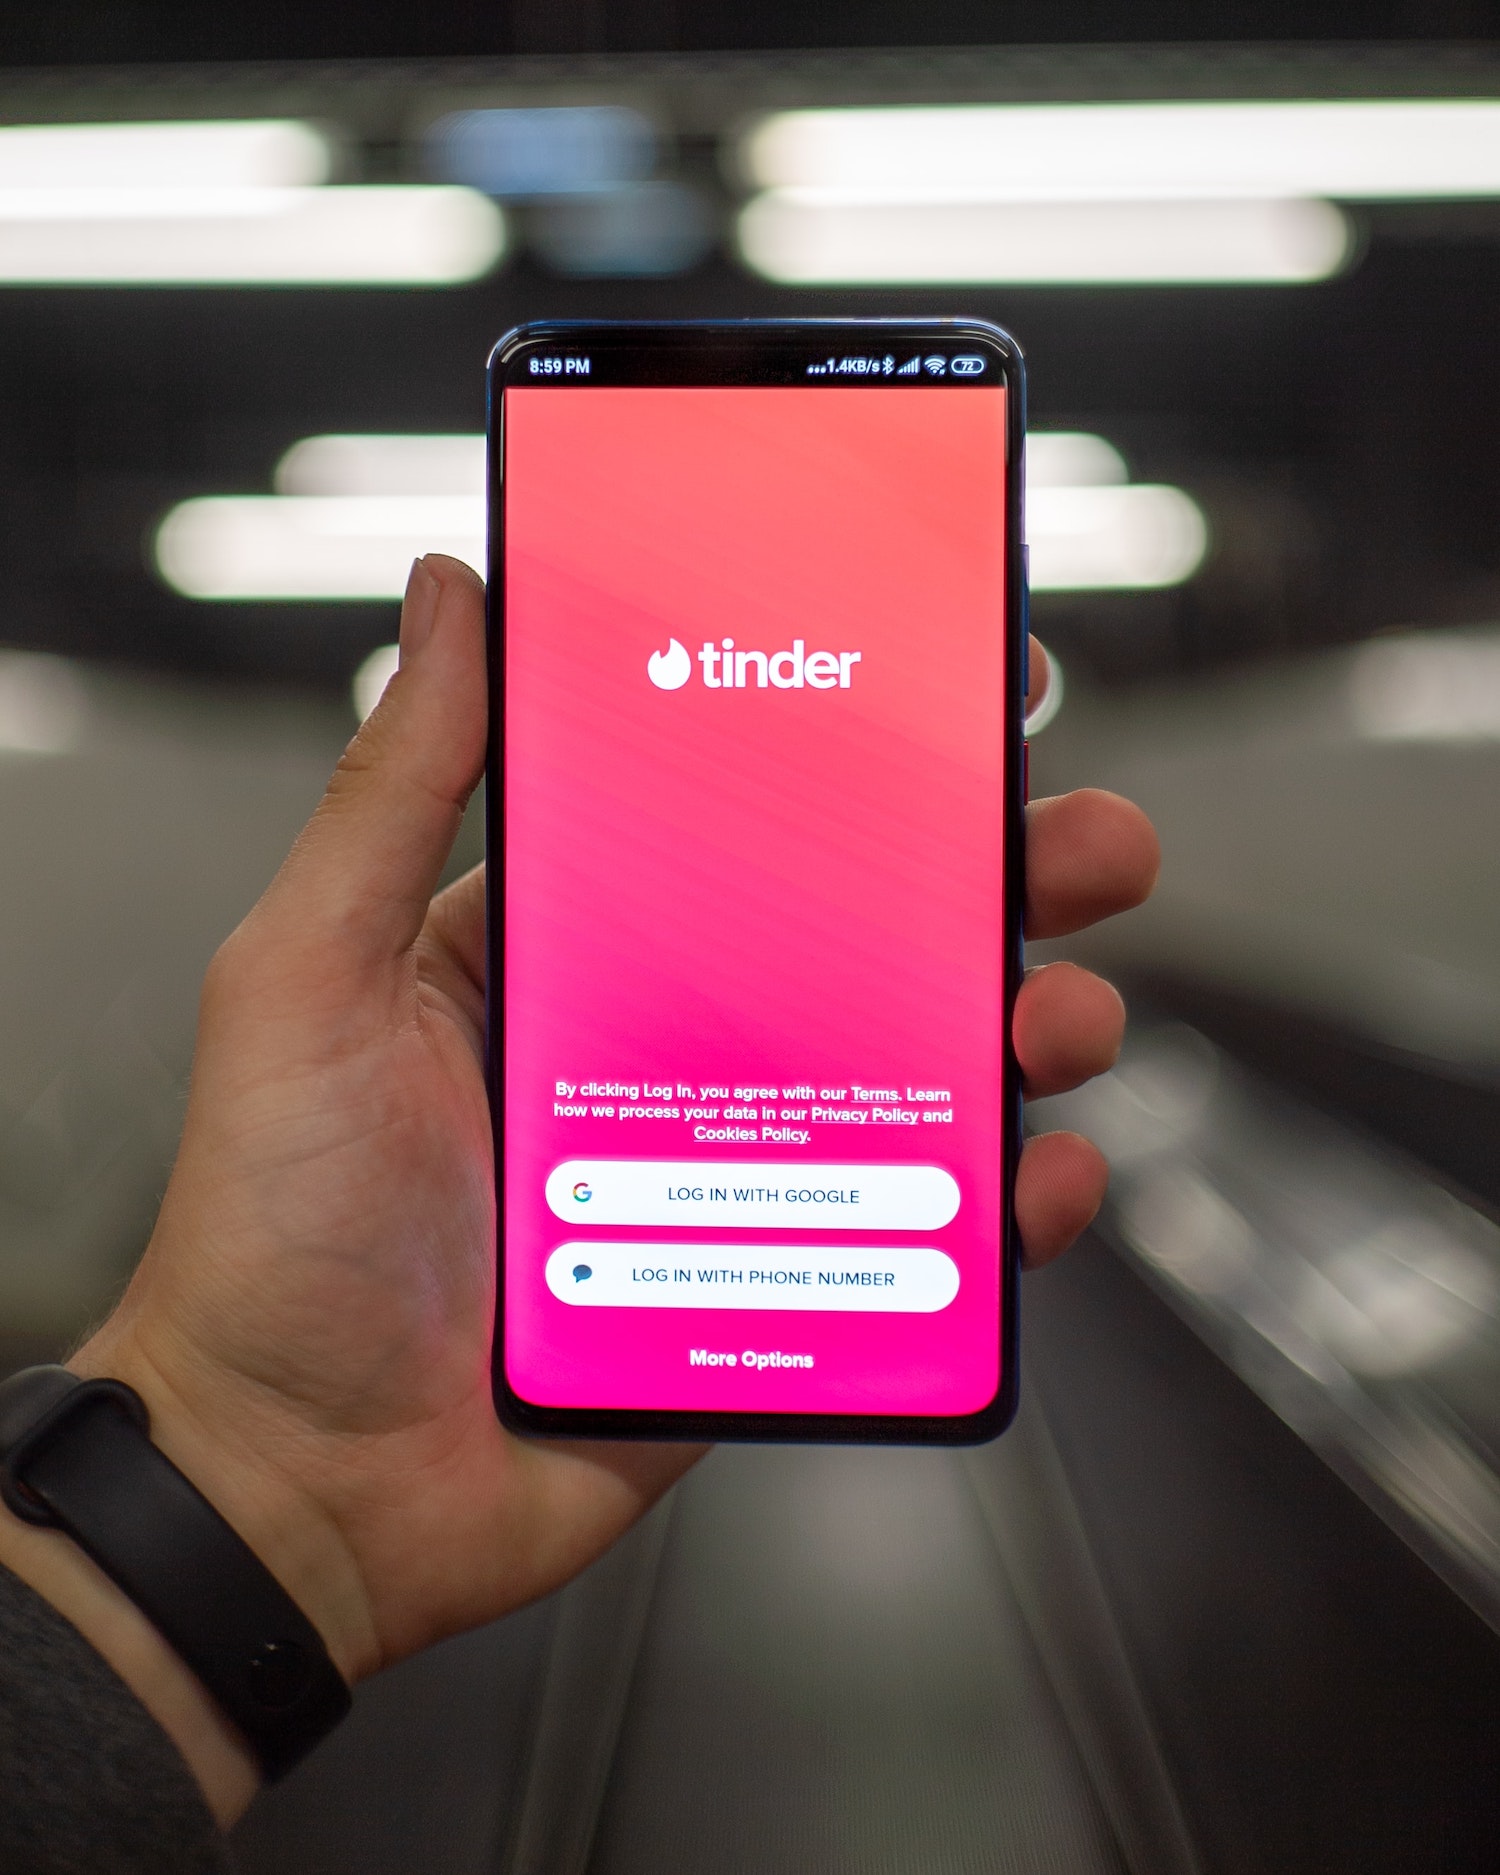 Tinder - one of the most famous dating app